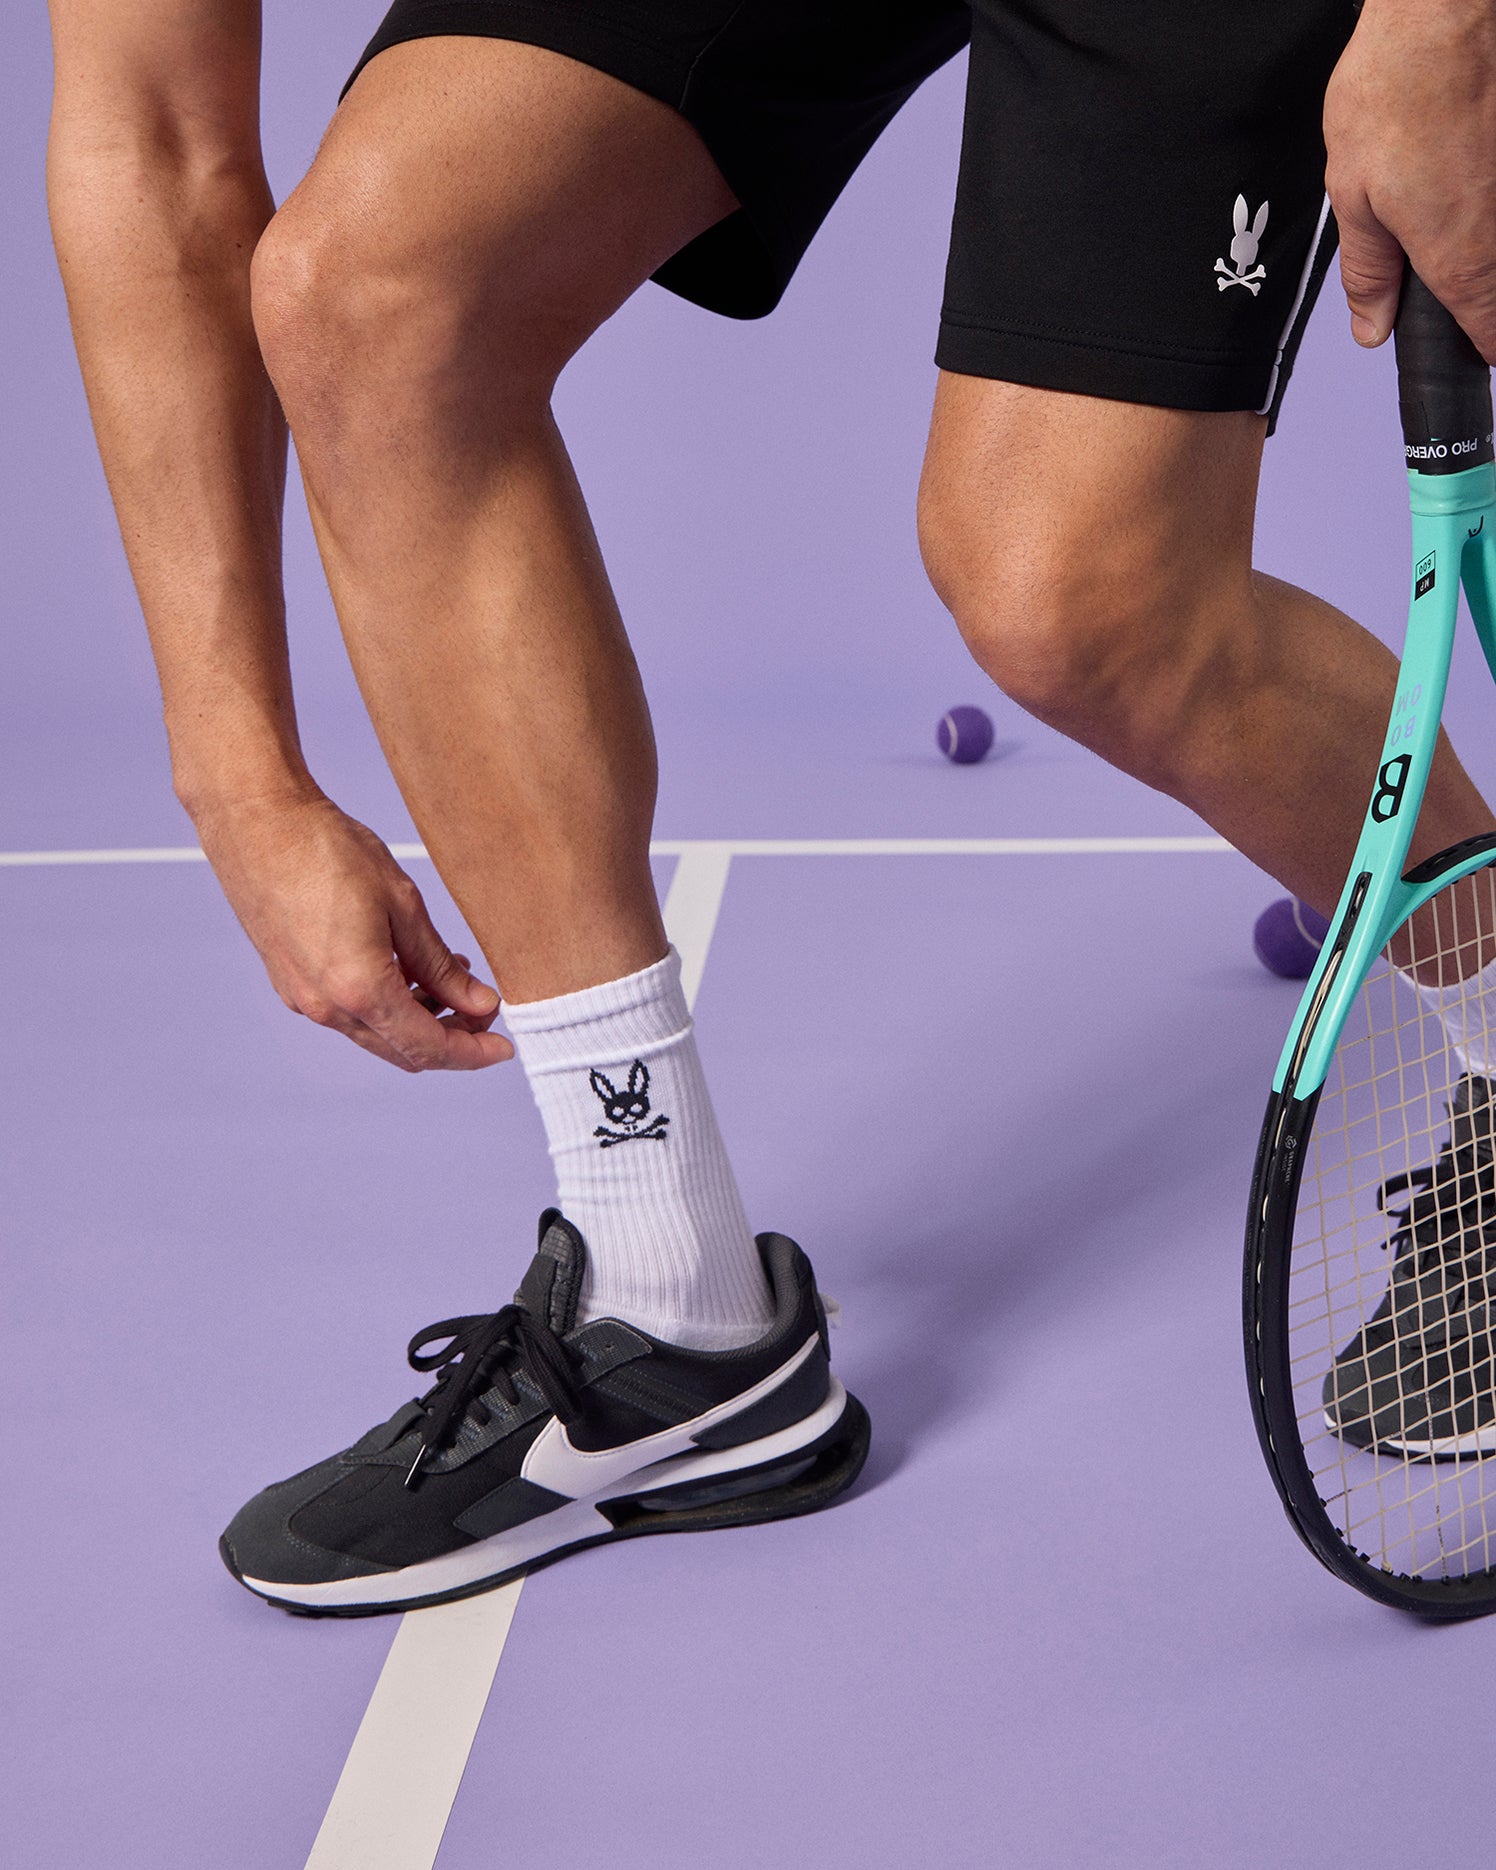 A close-up shot of a person's lower legs and feet, wearing black sneakers and Psycho Bunny men's sport socks with an Embroidered Bunny Logo, standing beside a green tennis racquet on a purple court.